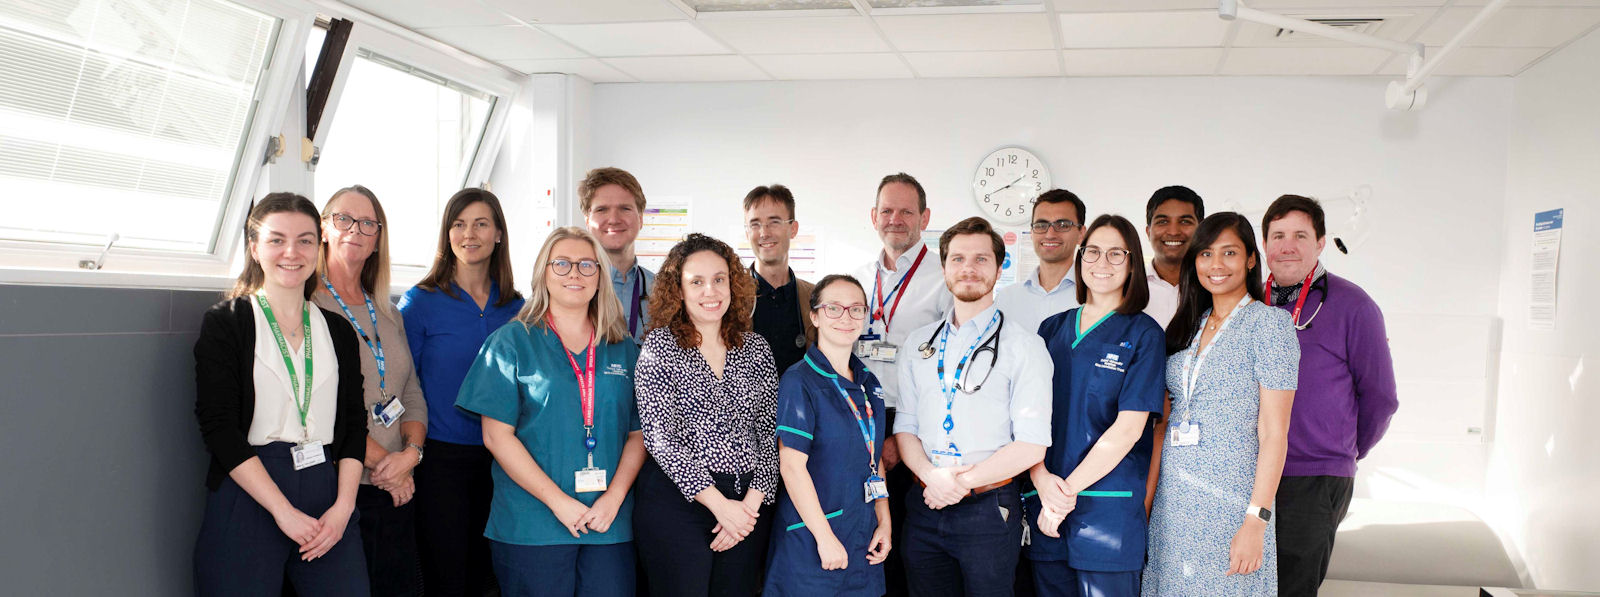 15 smiling people wearing lanyards, some in healthcare worker uniforms